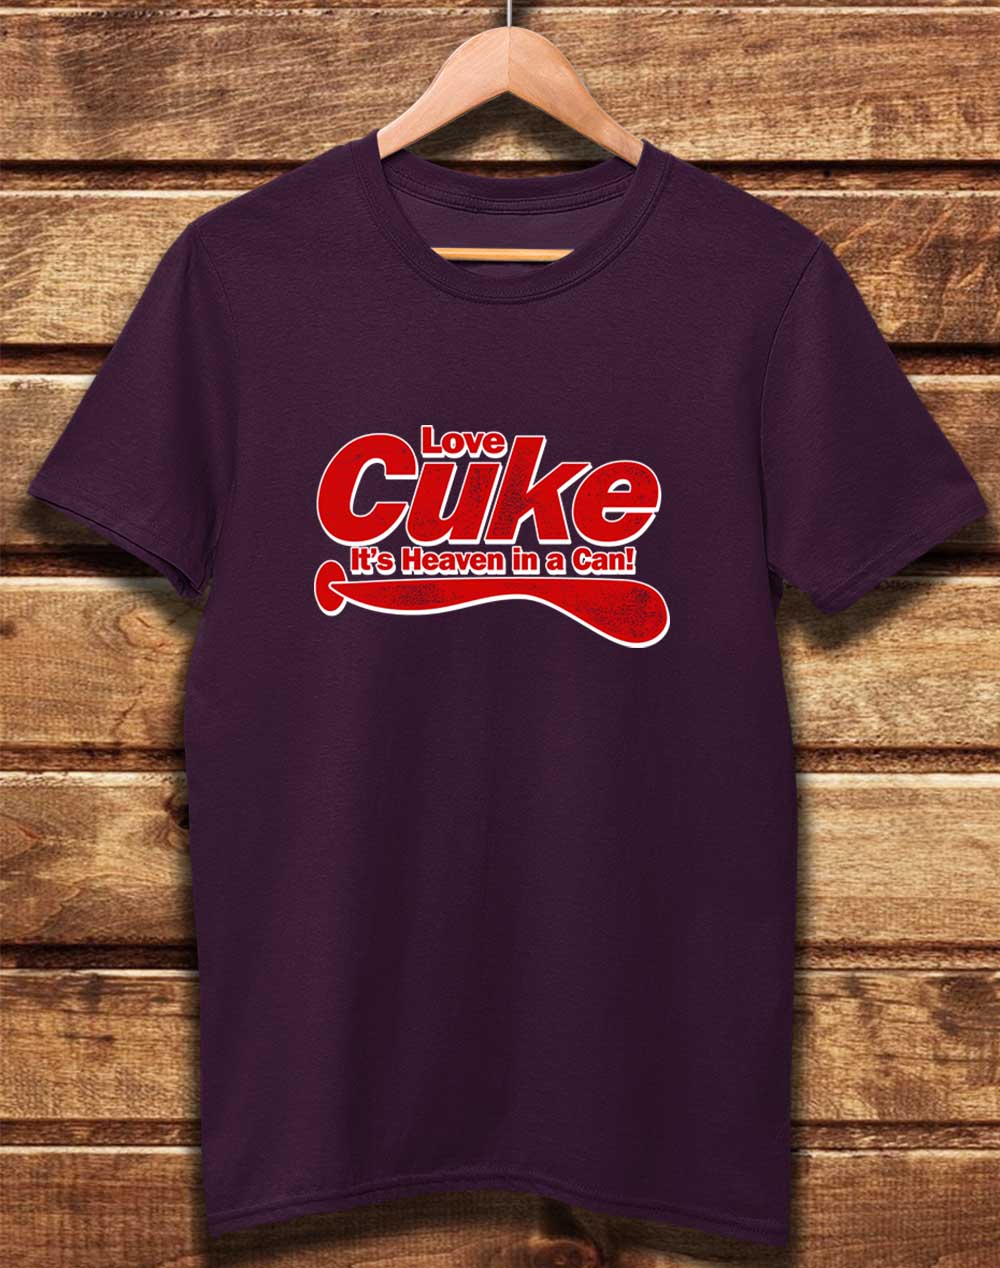 Eggplant - DELUXE Cuke Heaven in a Can Organic Cotton T-Shirt